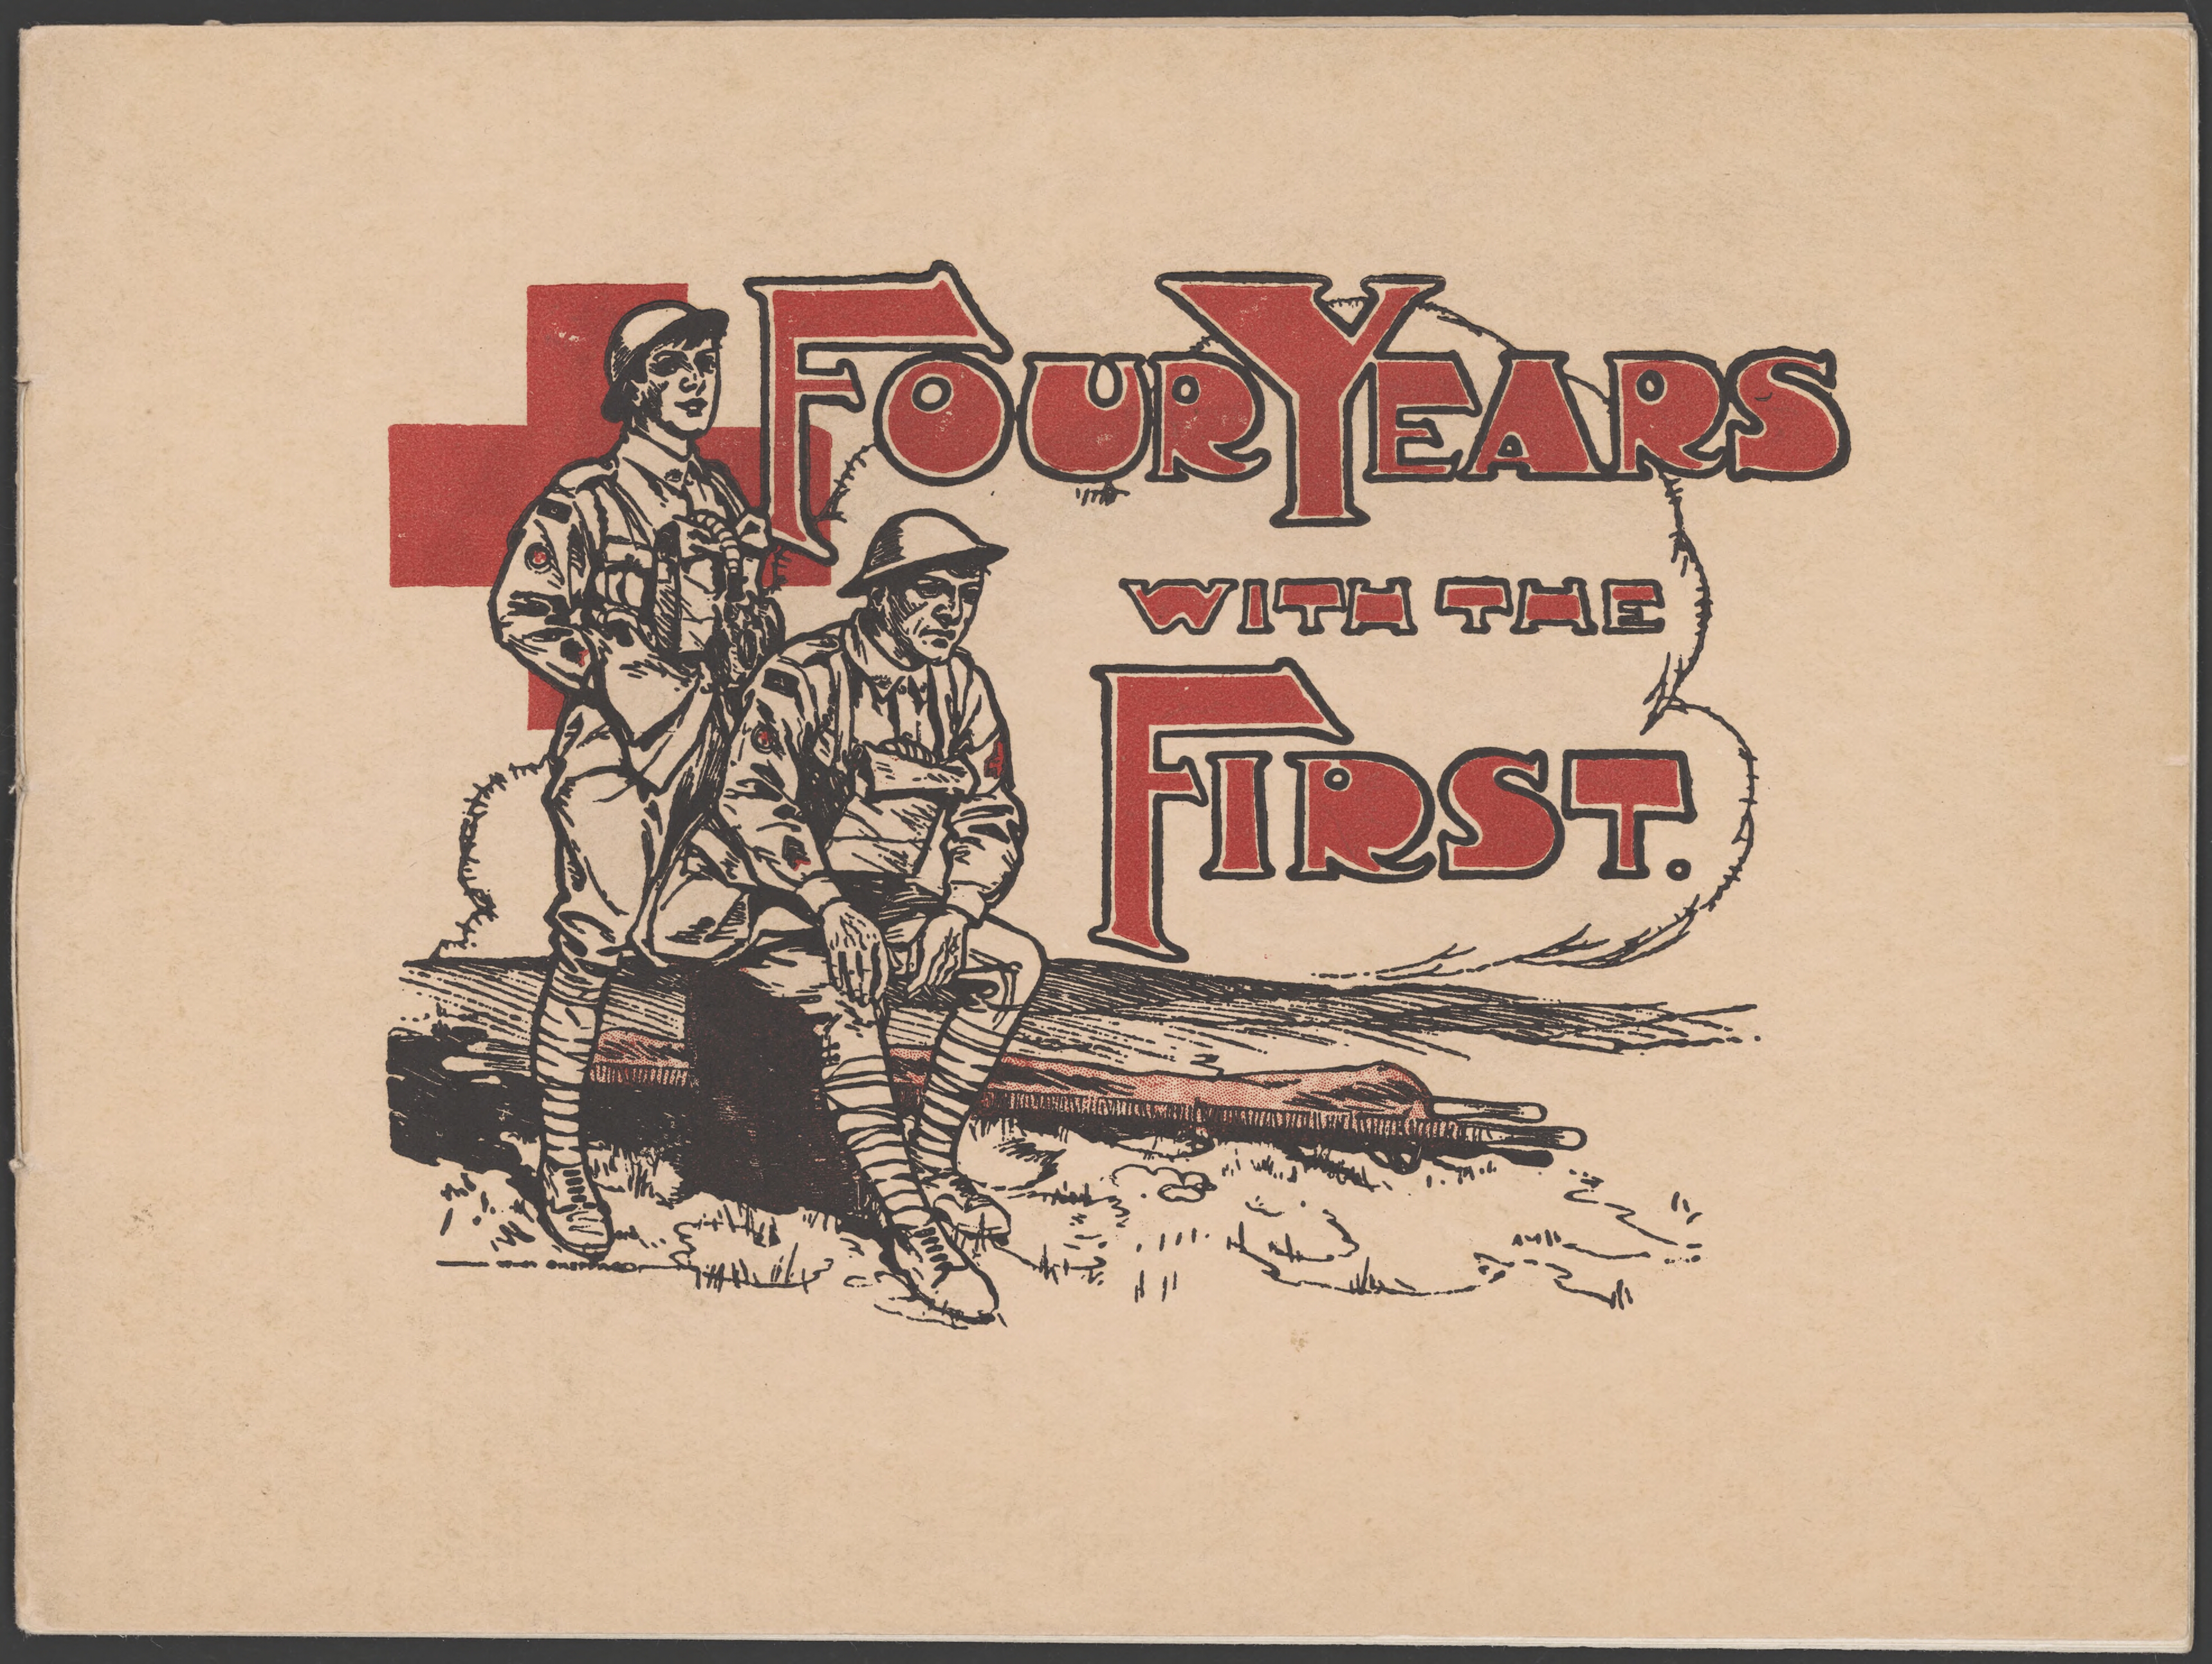 A booklet titled Four Years with the First. The cover features a hand drawn illustration of two soldiers. 